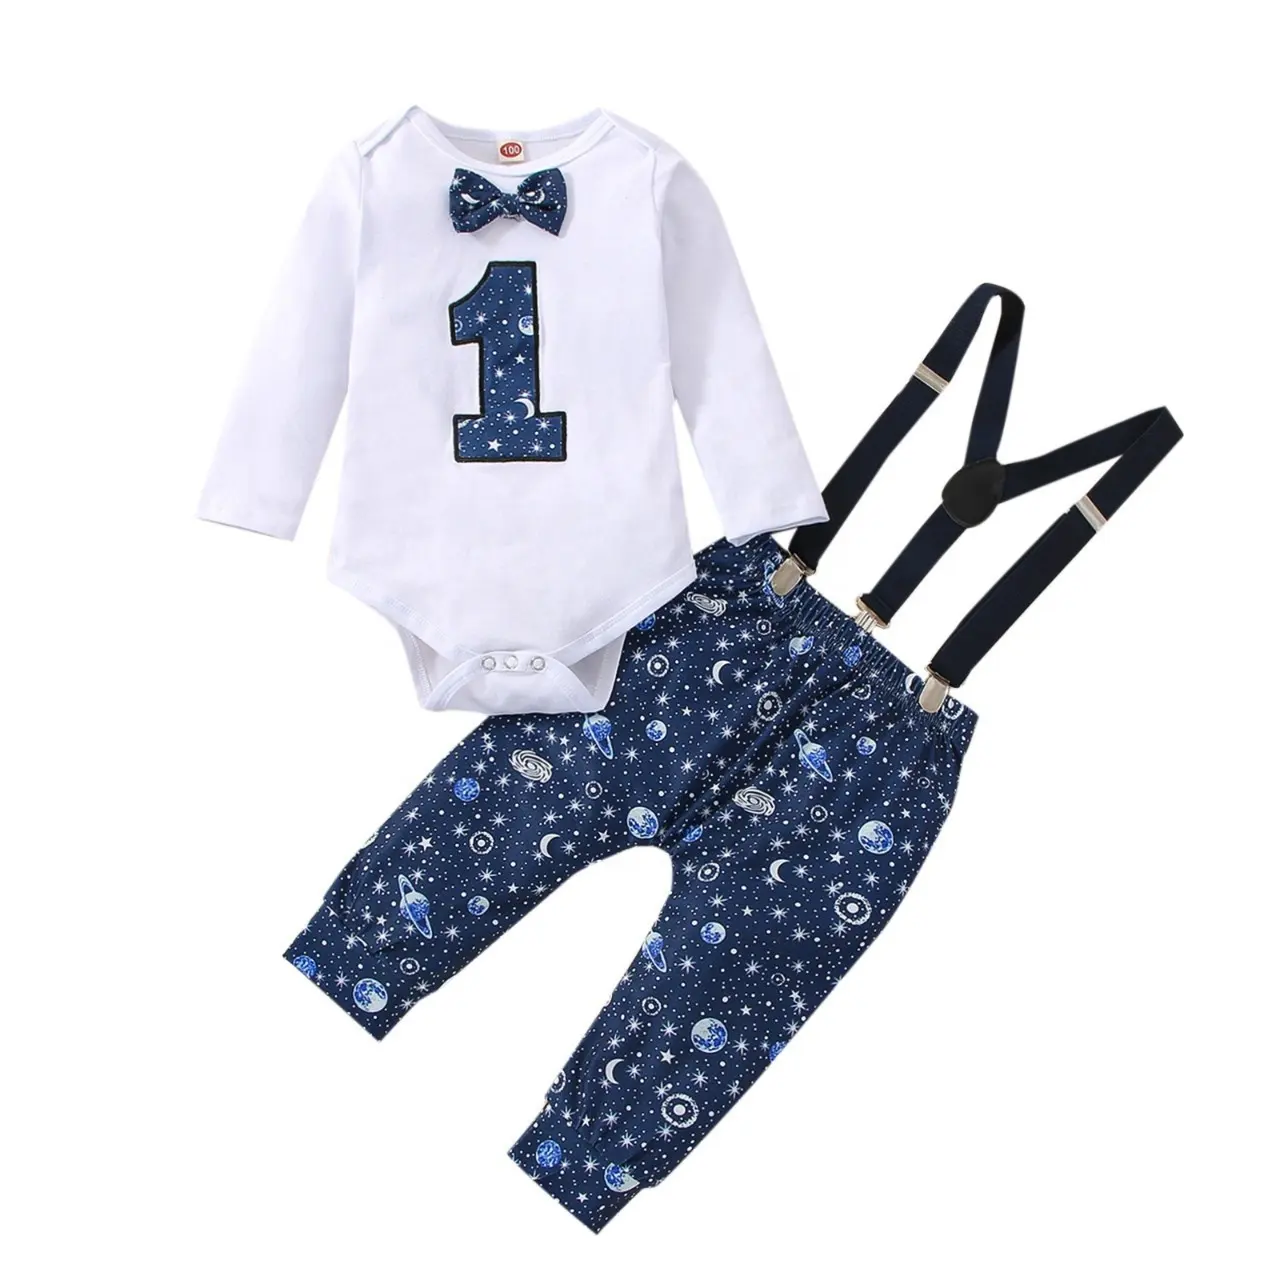 Wholesale Boy Clothes Sets Long Sleeve Infant Toddler Jumpsuits 6m-3years Baby Boy Gentleman Romper Suits